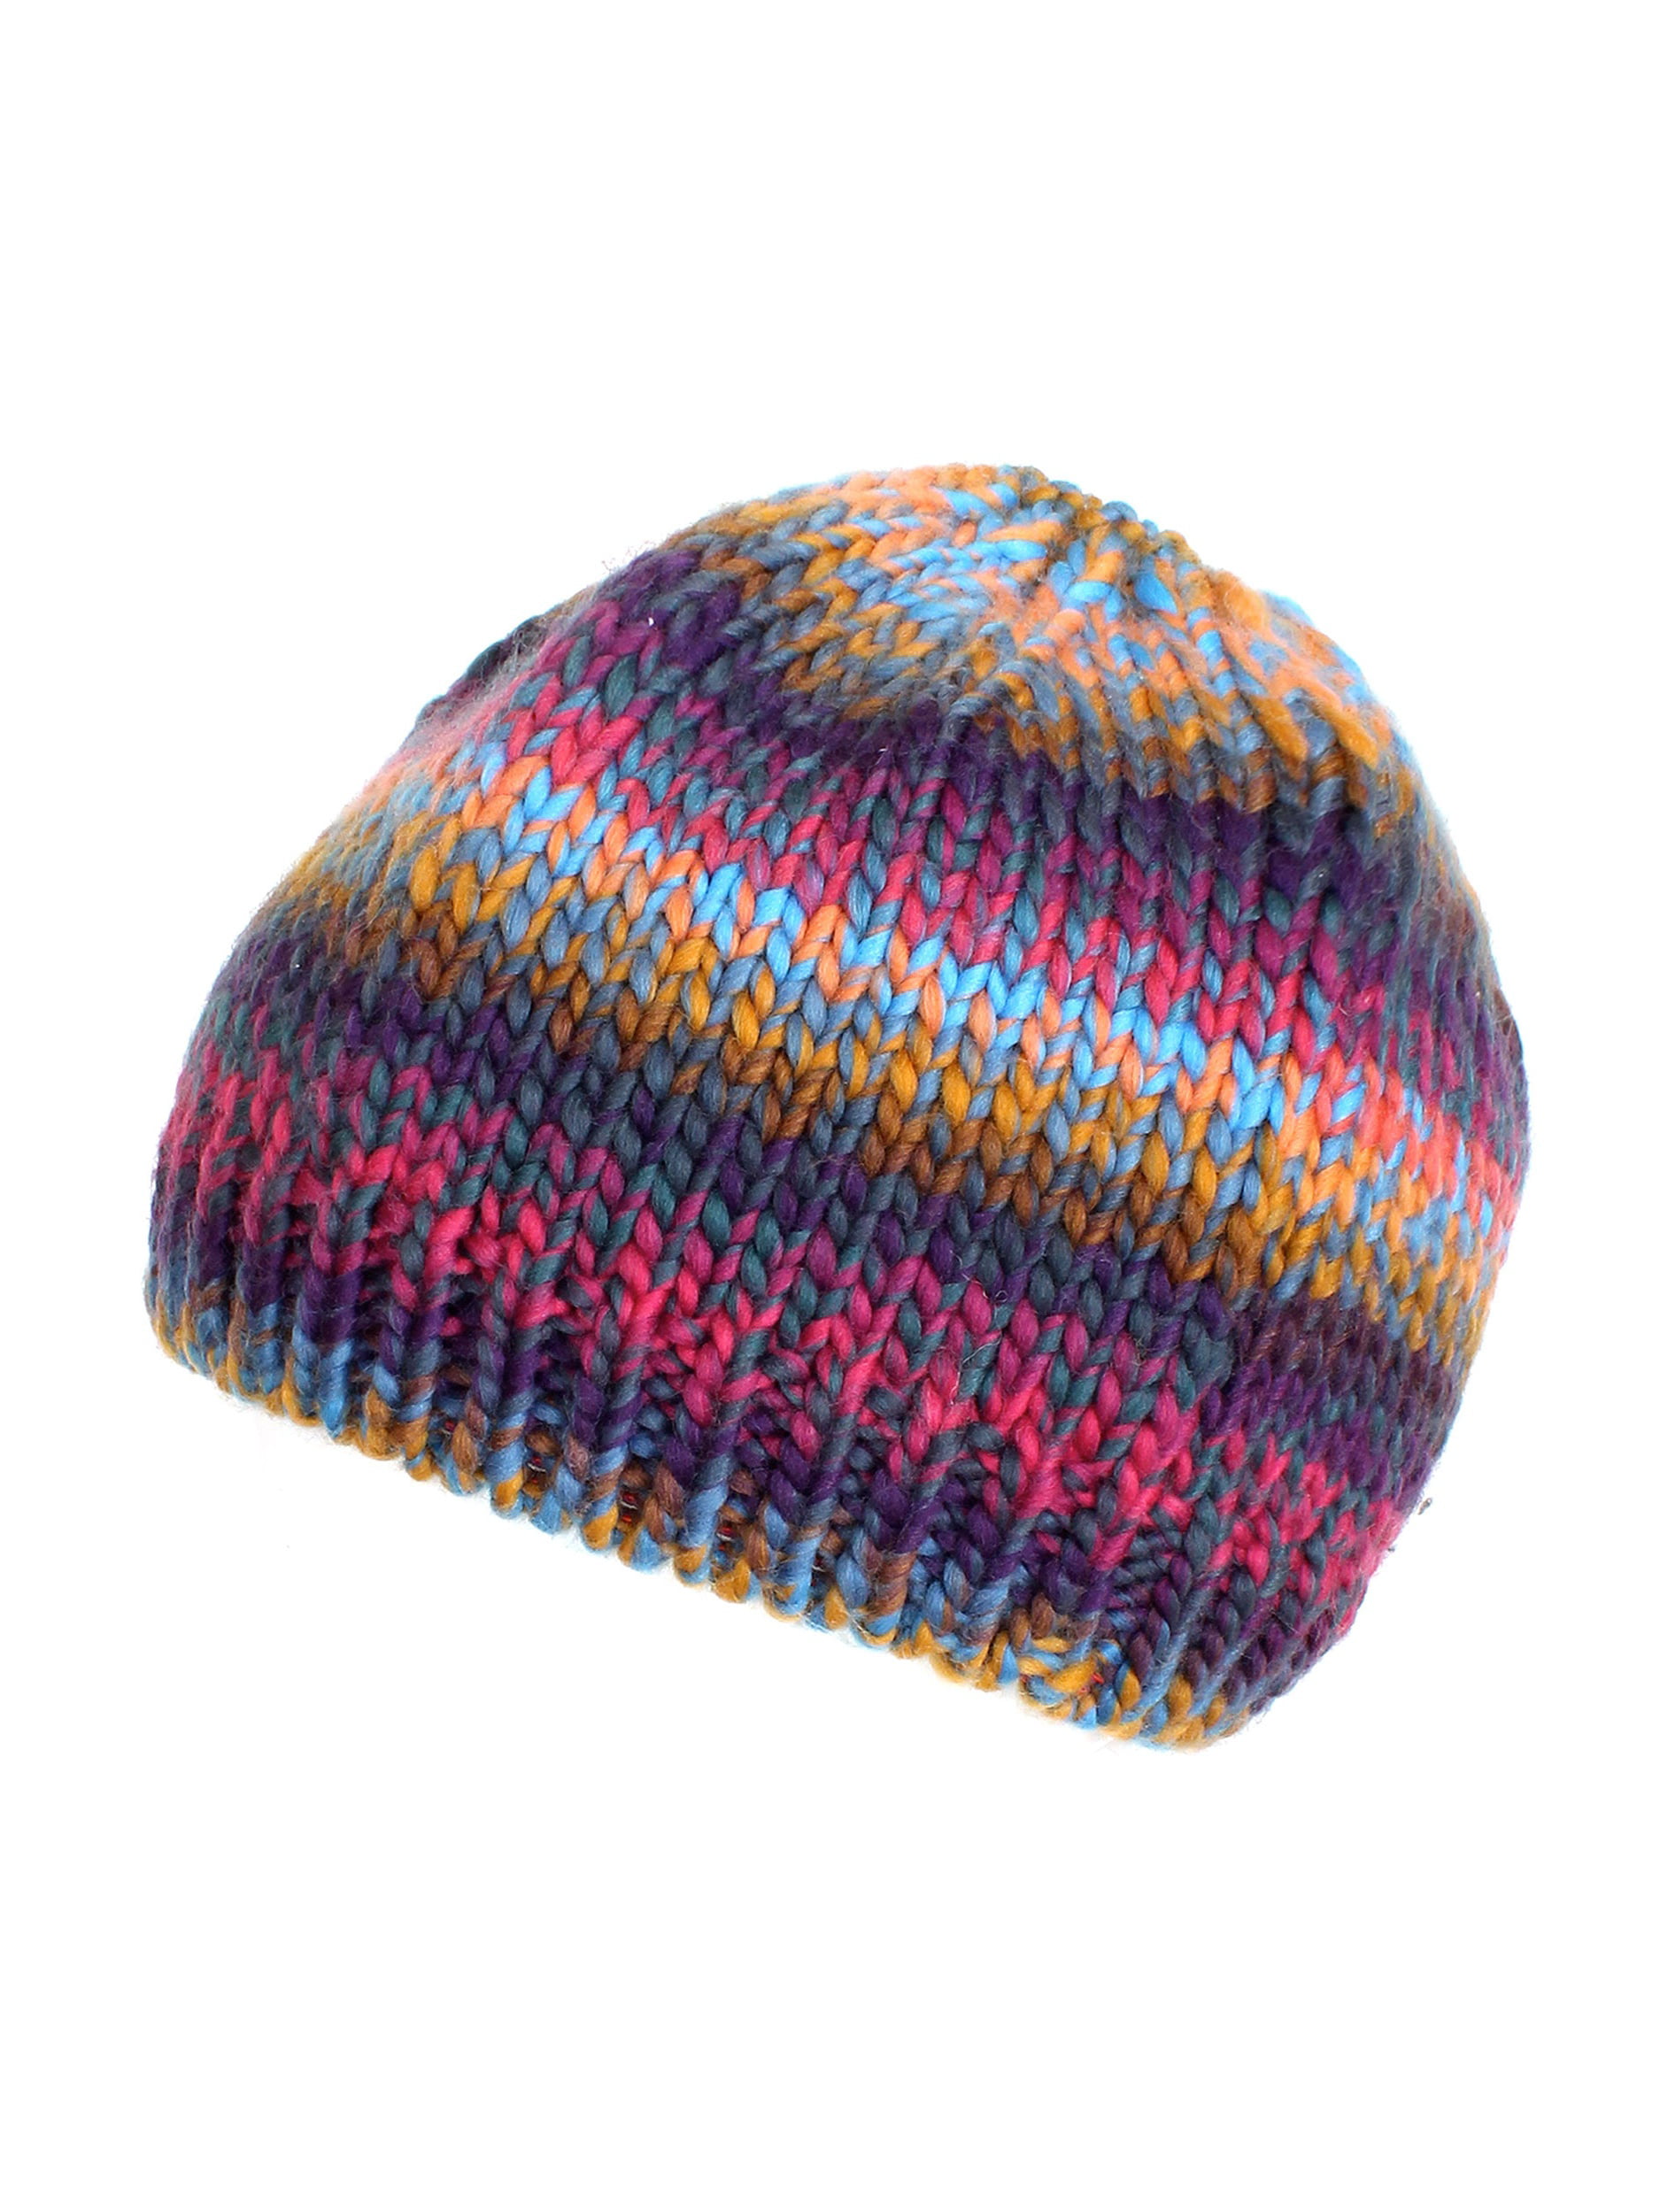 Women knit beret Wool ribbed hat Multicolored beanie Winter colorful hat